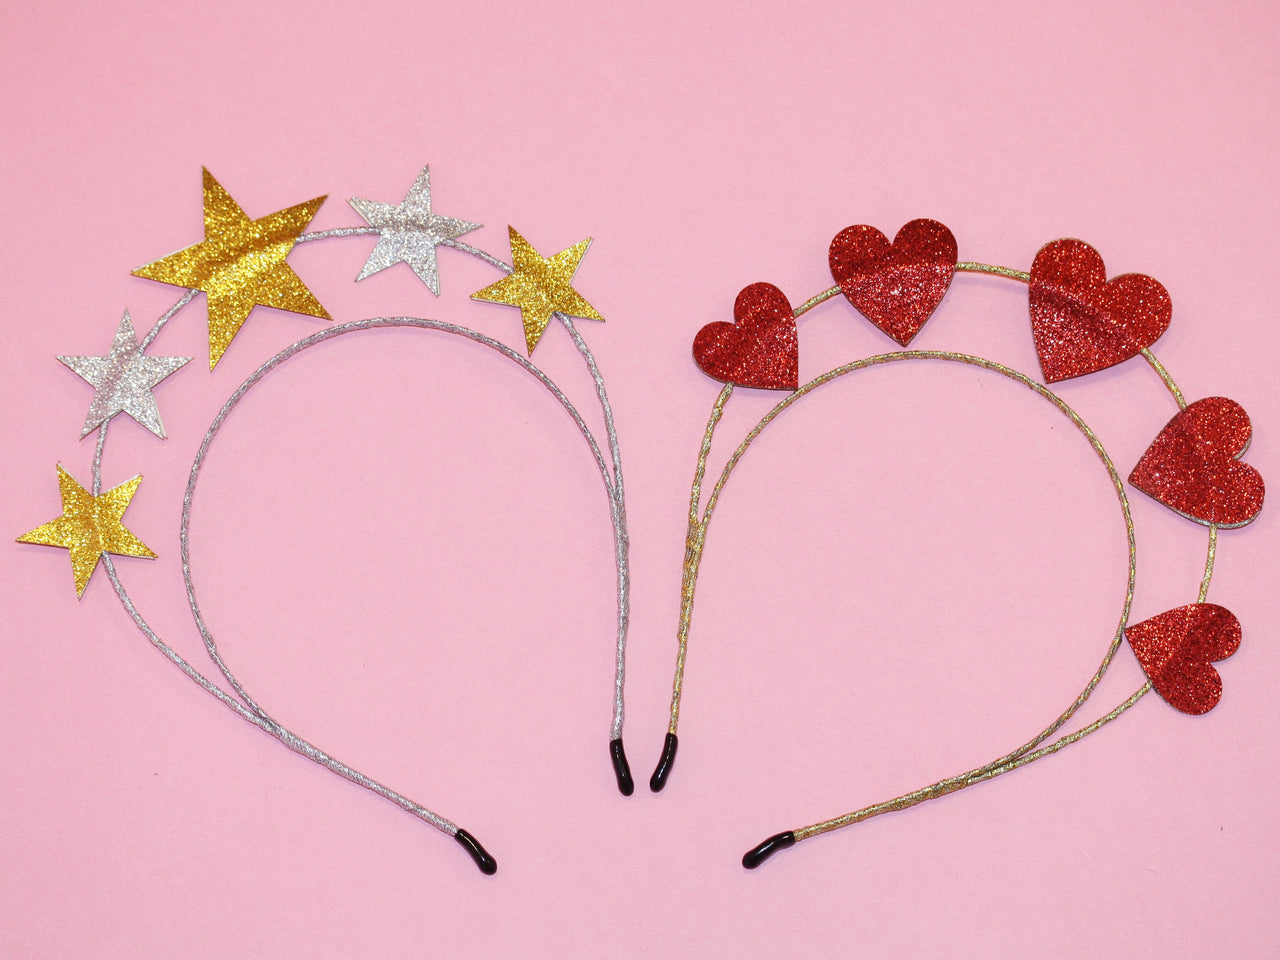 Glitter Stars and Hearts Bachelorette Party Headbands with Veil